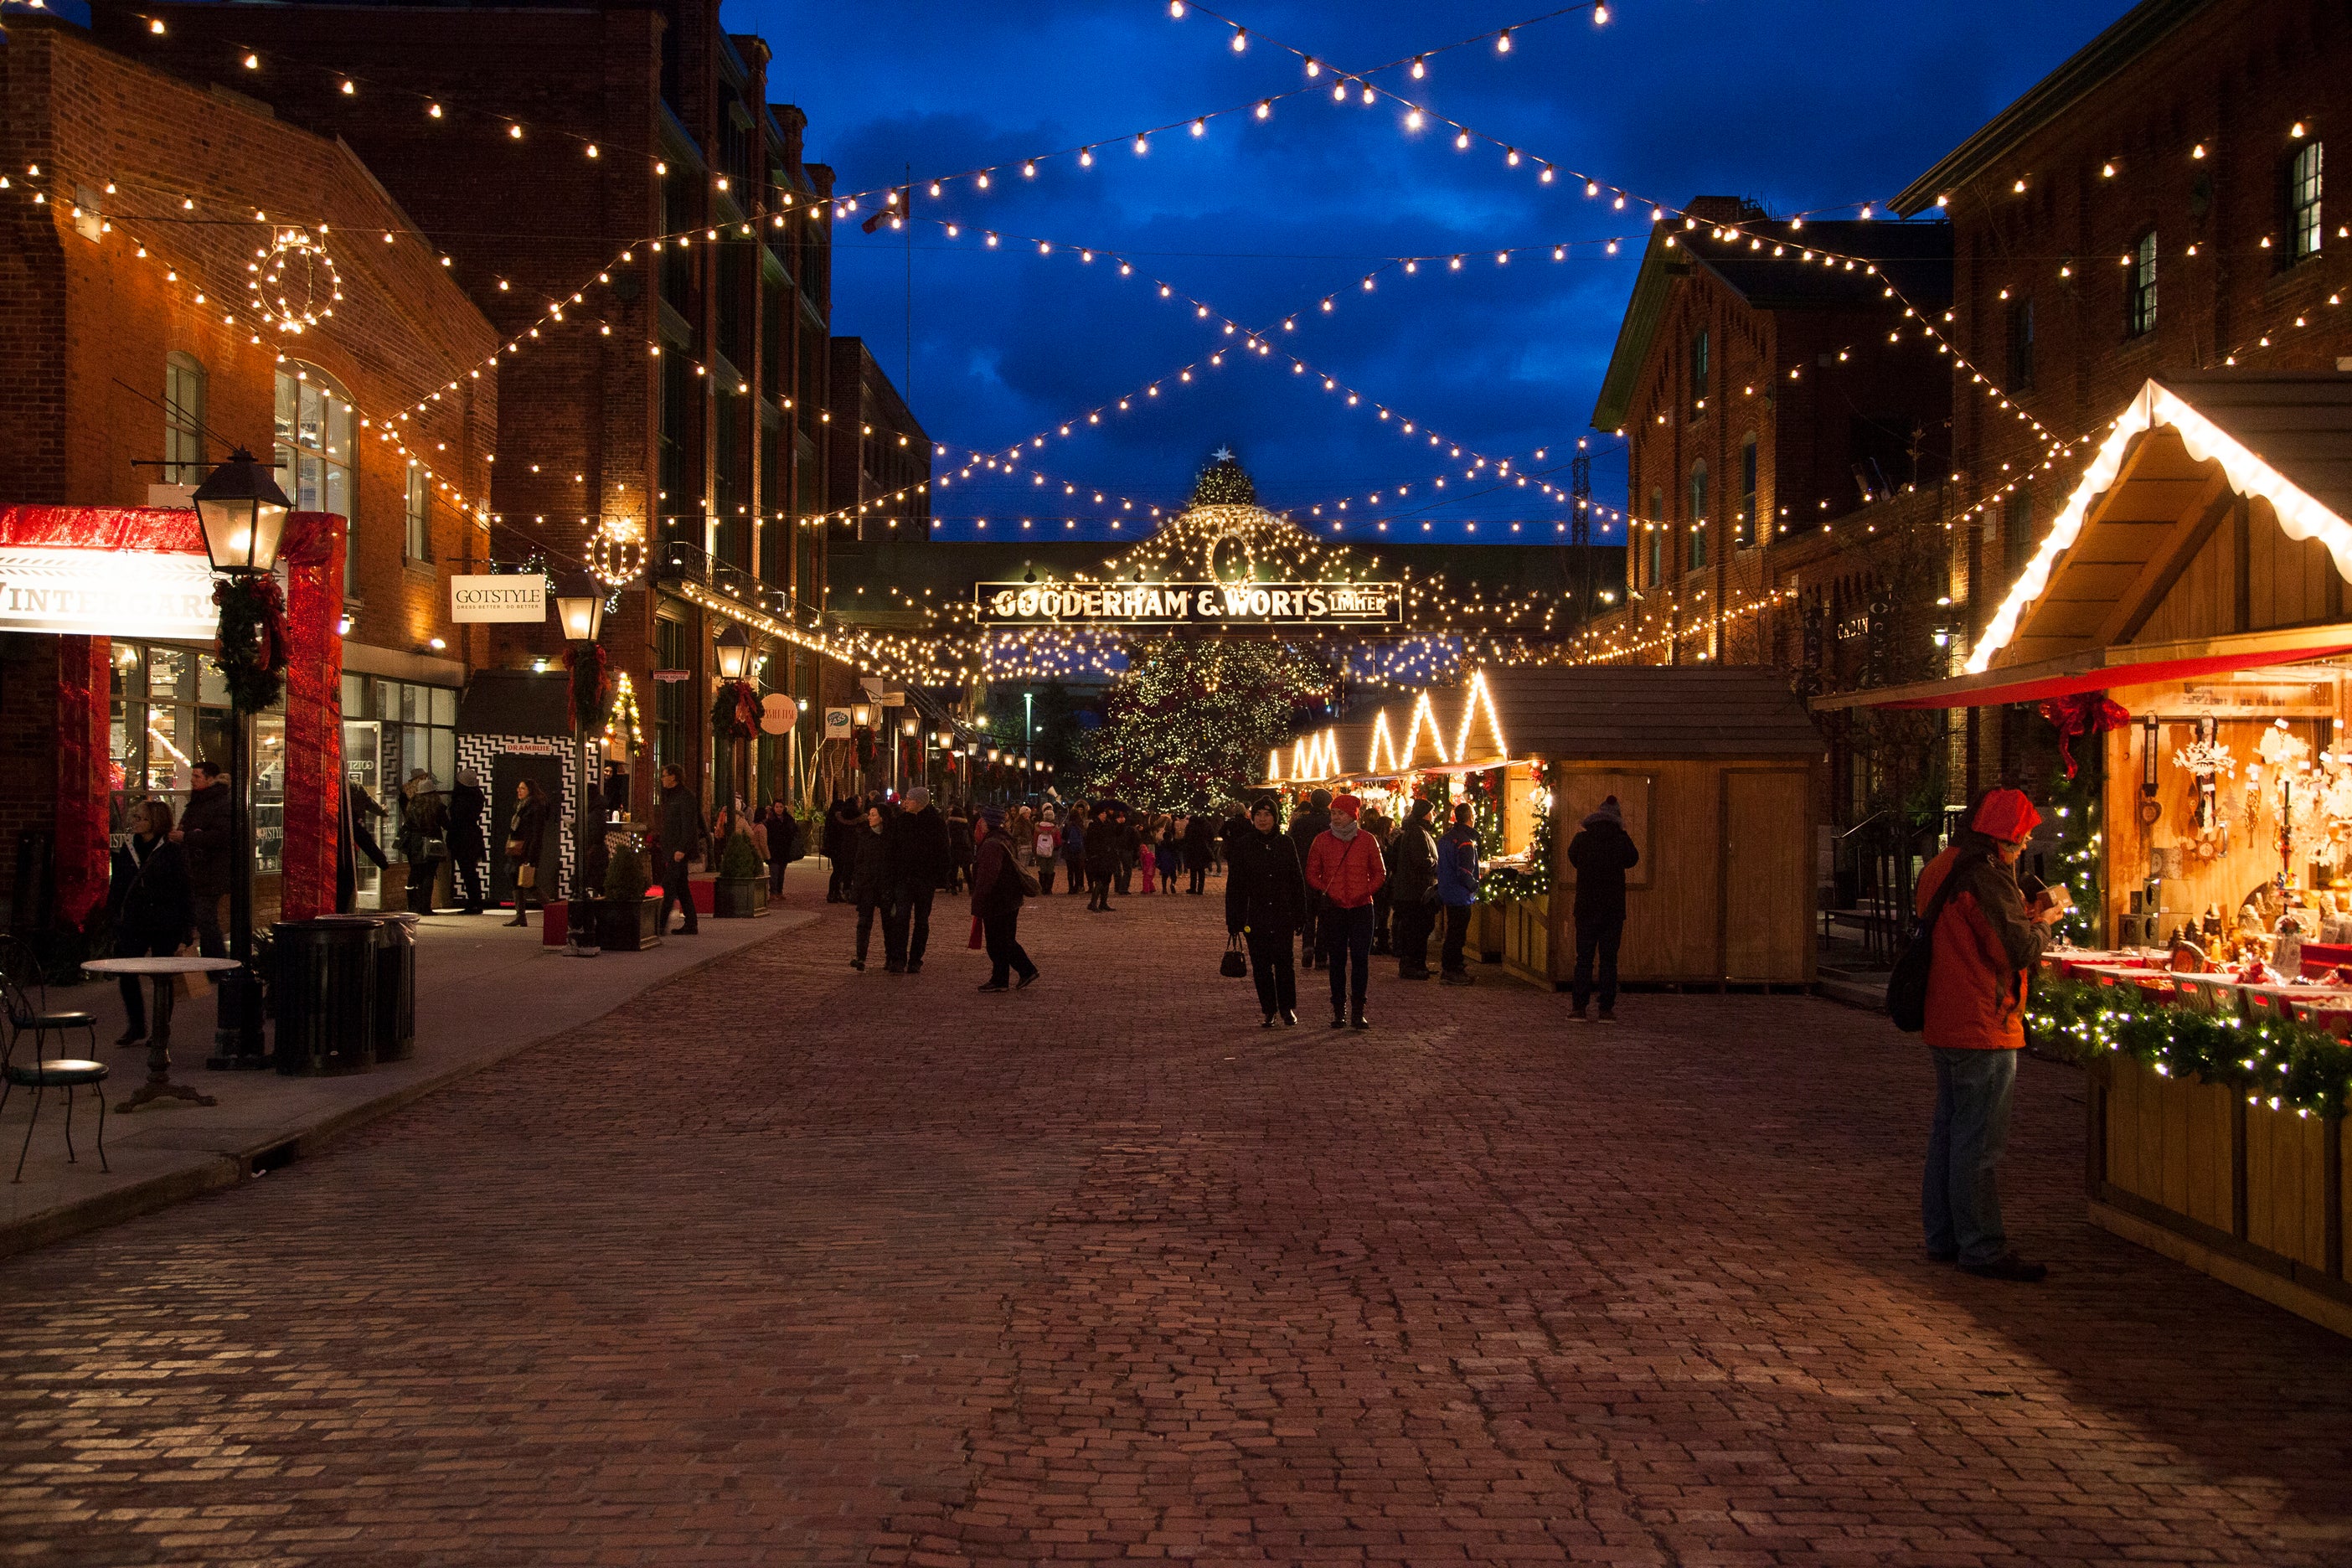 A view of the Toronto Christmas Market in the Distillery District.